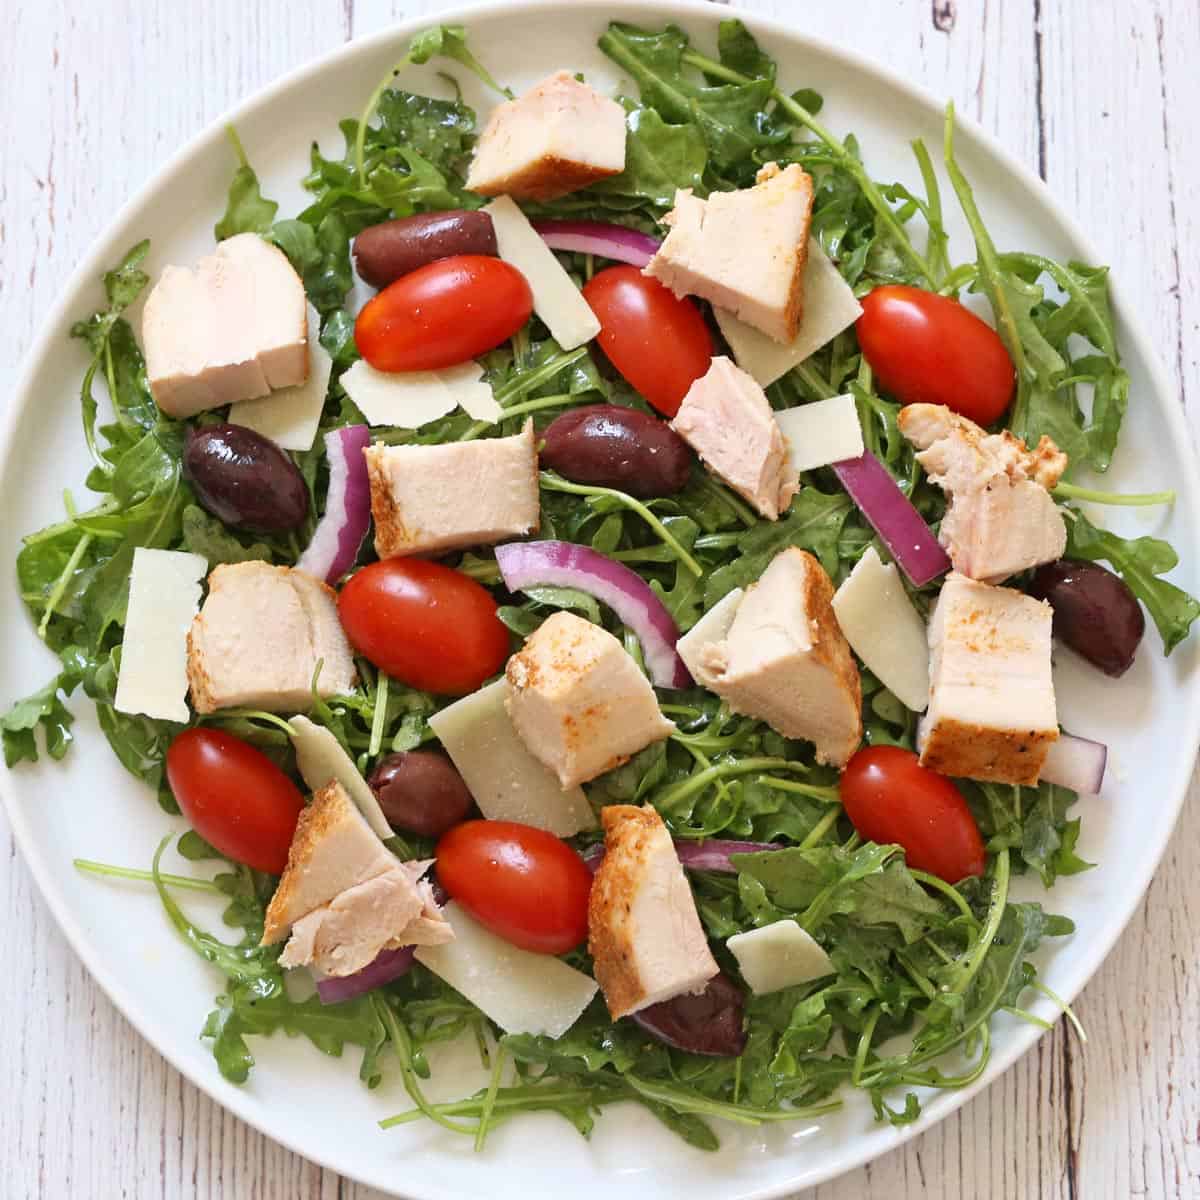 Cubed chicken was added to arugula salad.